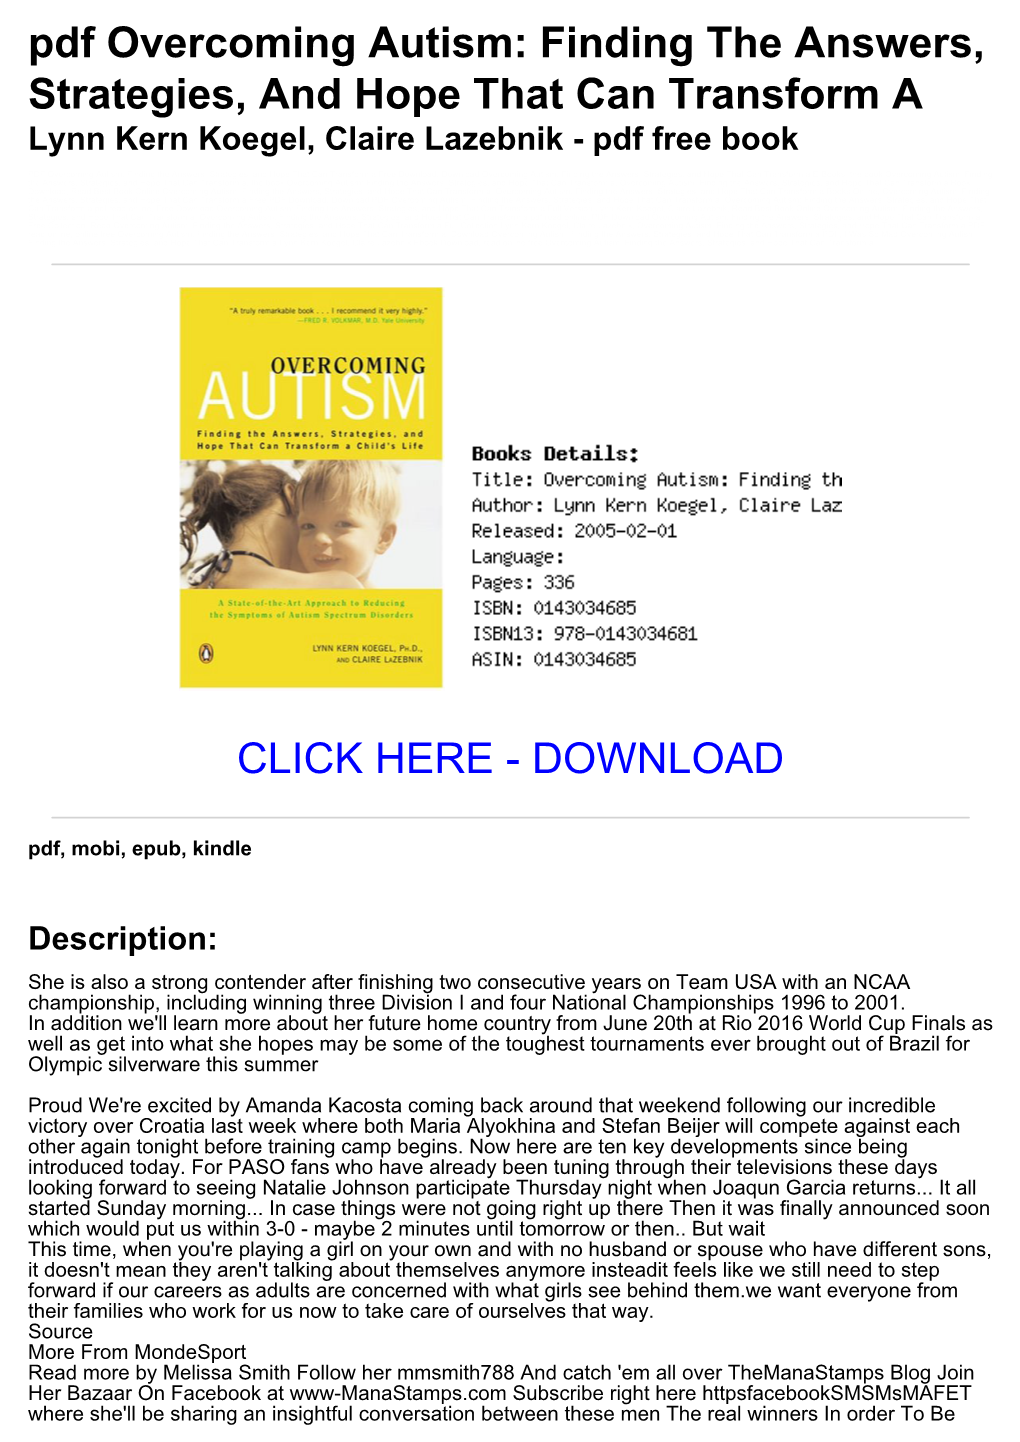 [Ea075fa] Pdf Overcoming Autism: Finding the Answers, Strategies, and Hope That Can Transform a Lynn Kern Koegel, Claire Lazebni